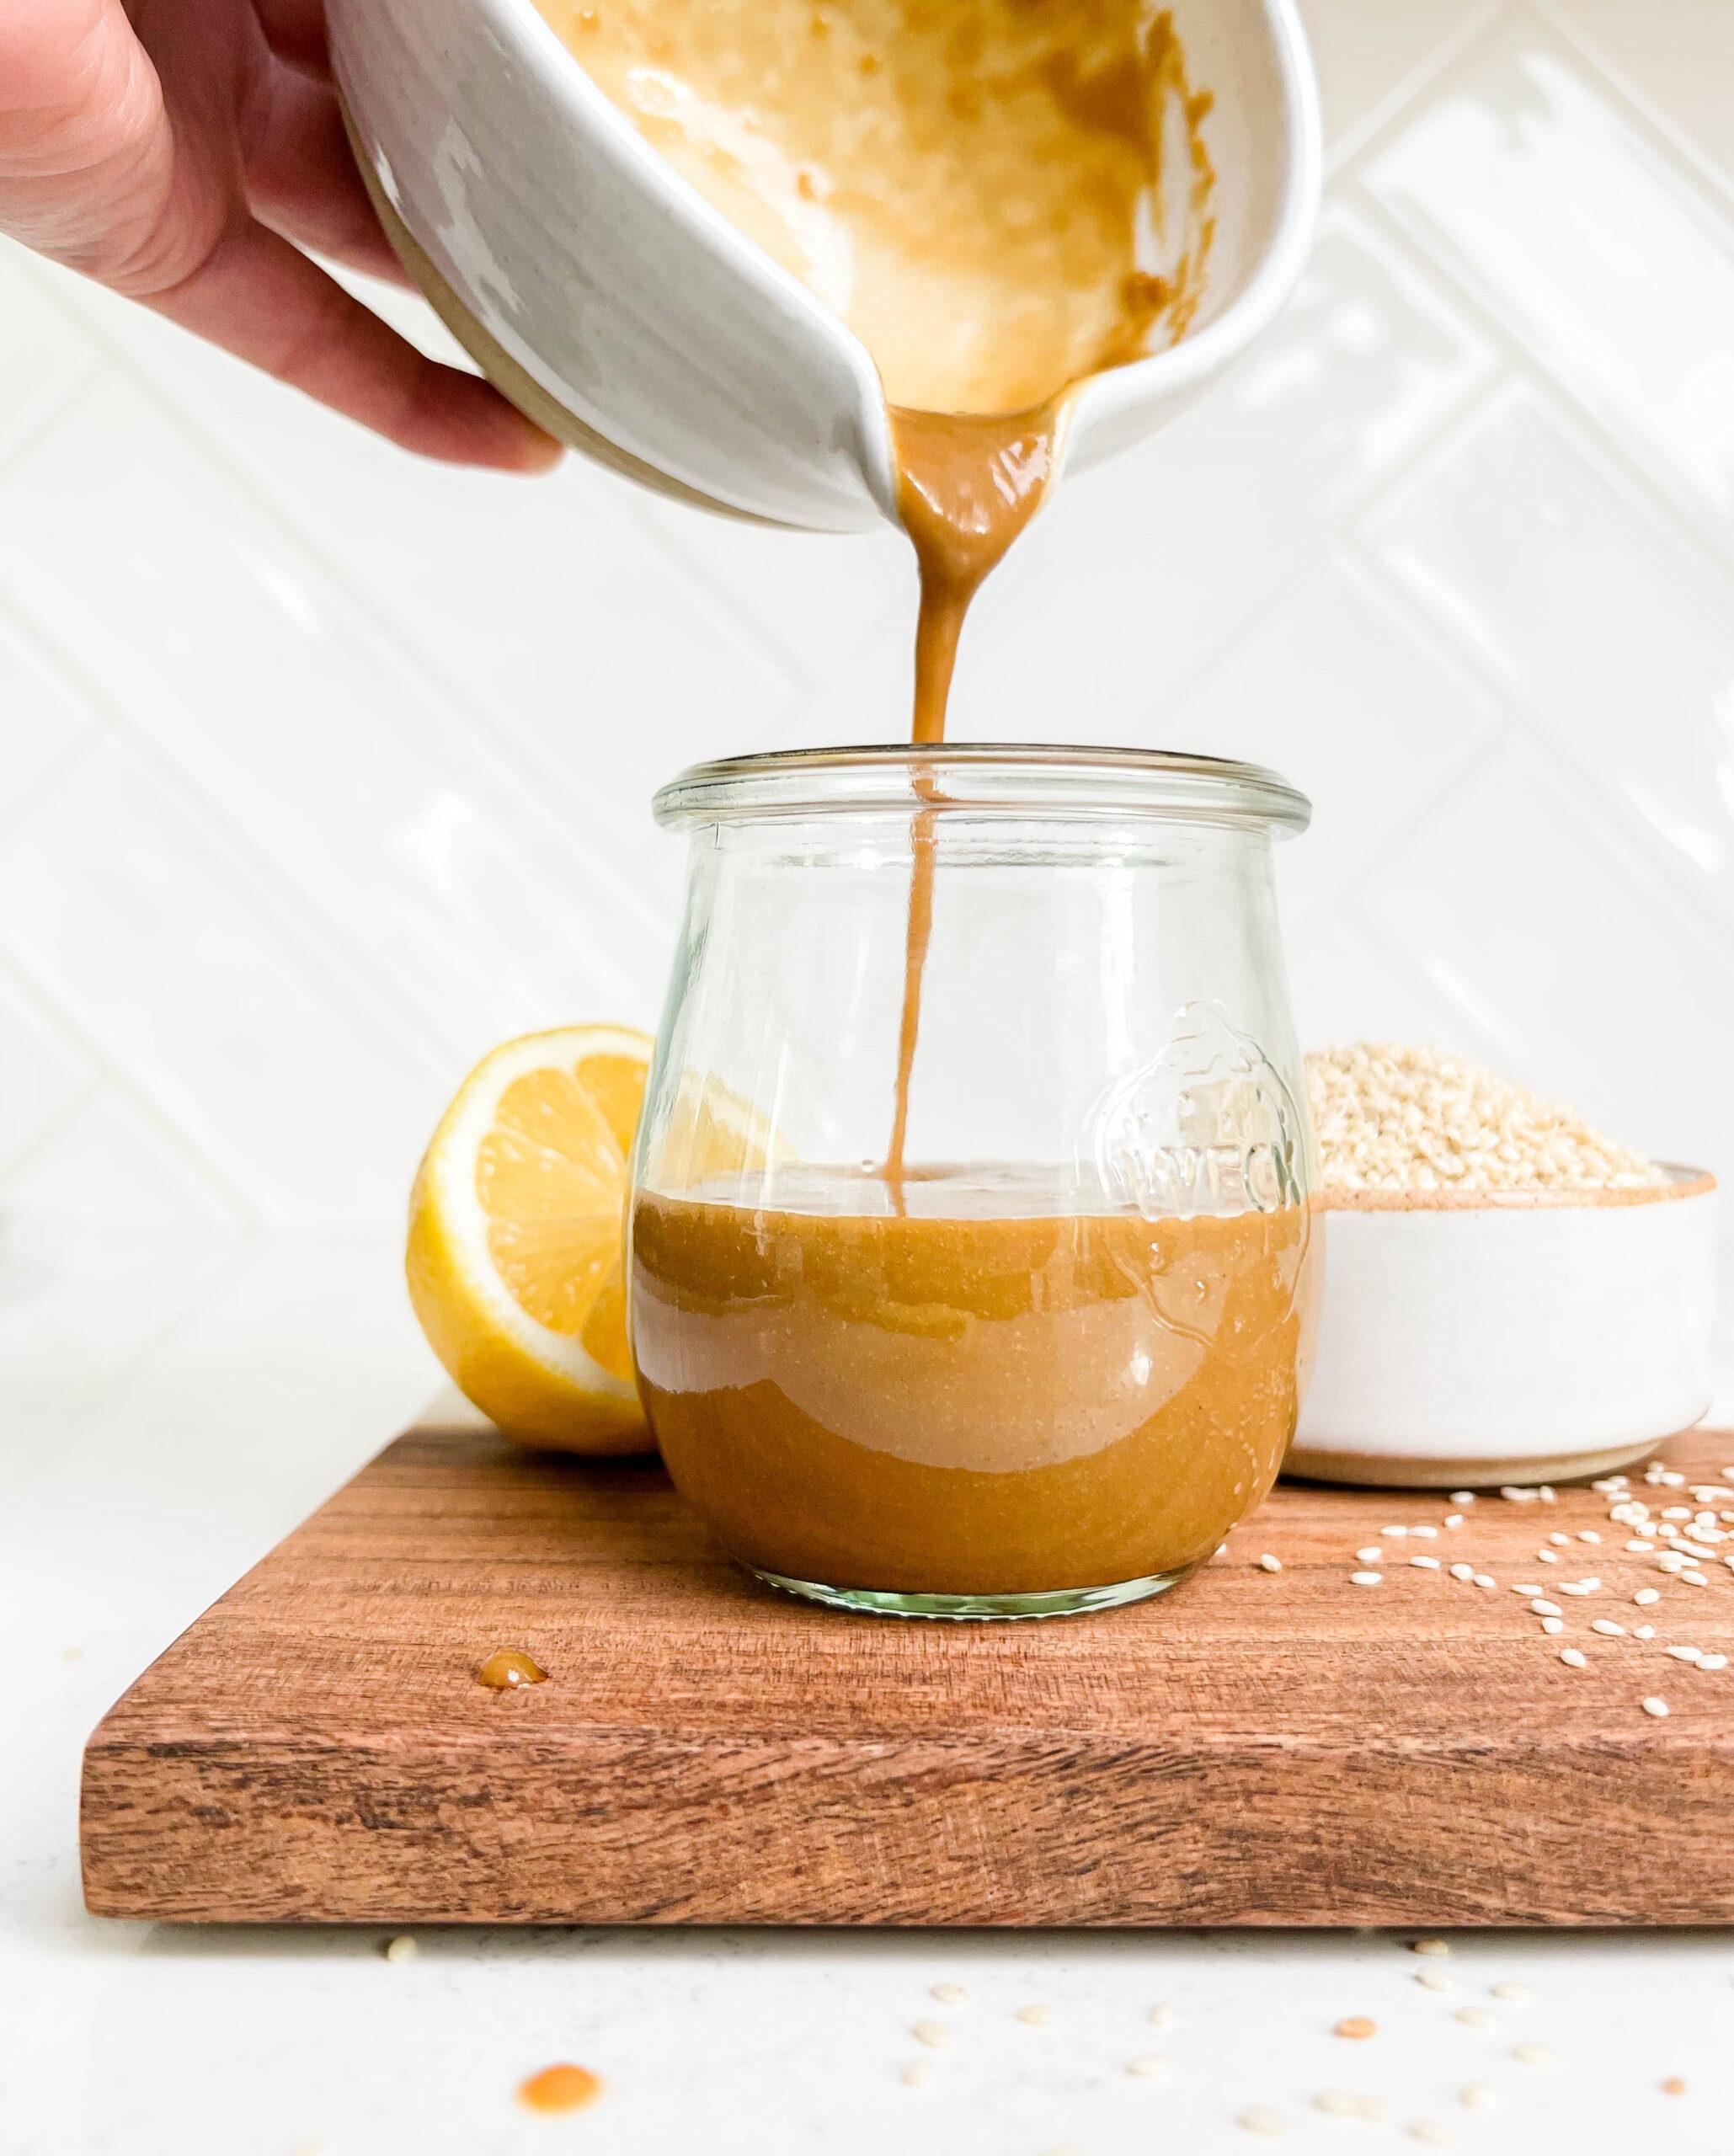 peanut dressing in a glass jar on a cutting board next to lemons and a bowl of sesame seeds